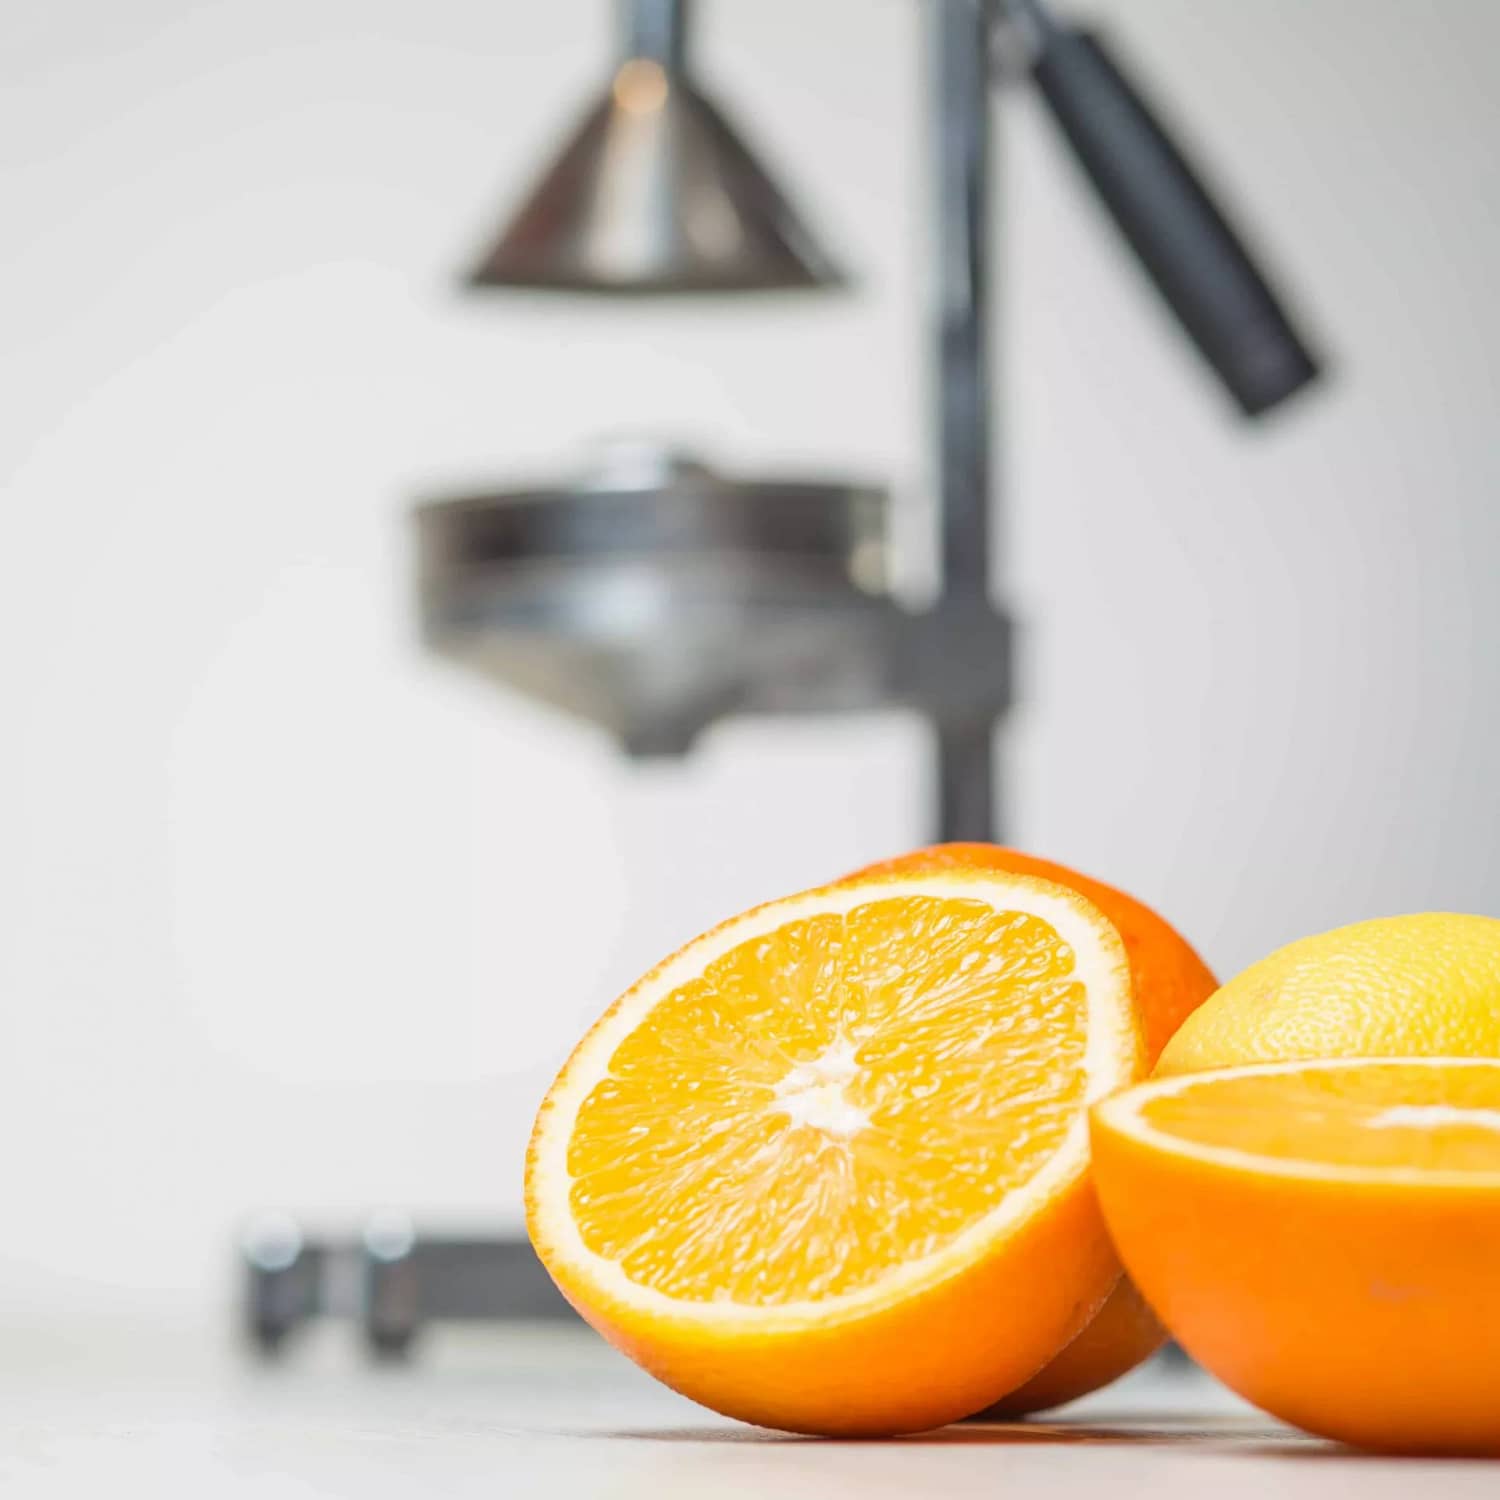 Commercial manual citrus juicer with oranges